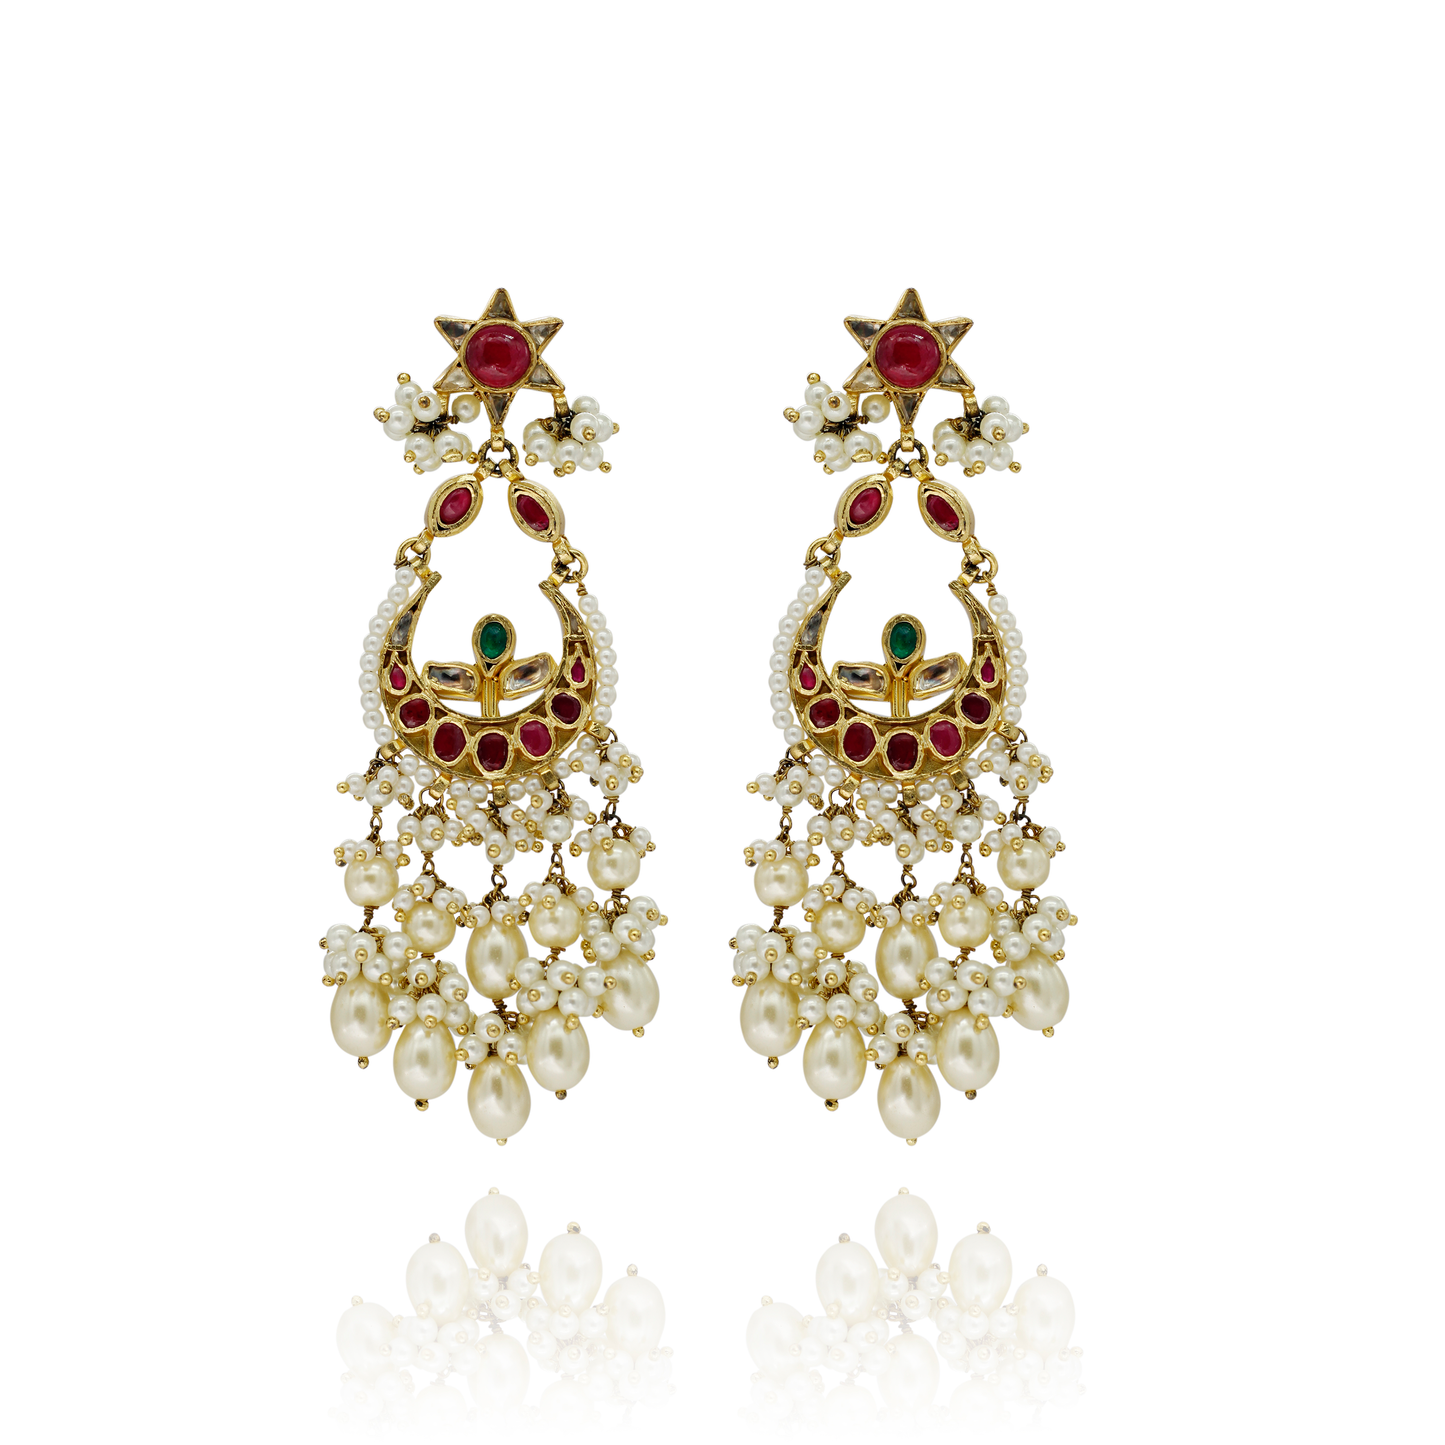 EARRINGS:- 92.5 STERLING SILVER GOLD PLATED WITH KUNDAN, GREEN & PINK ONYX stones AND FRESH WATER PEARLS.